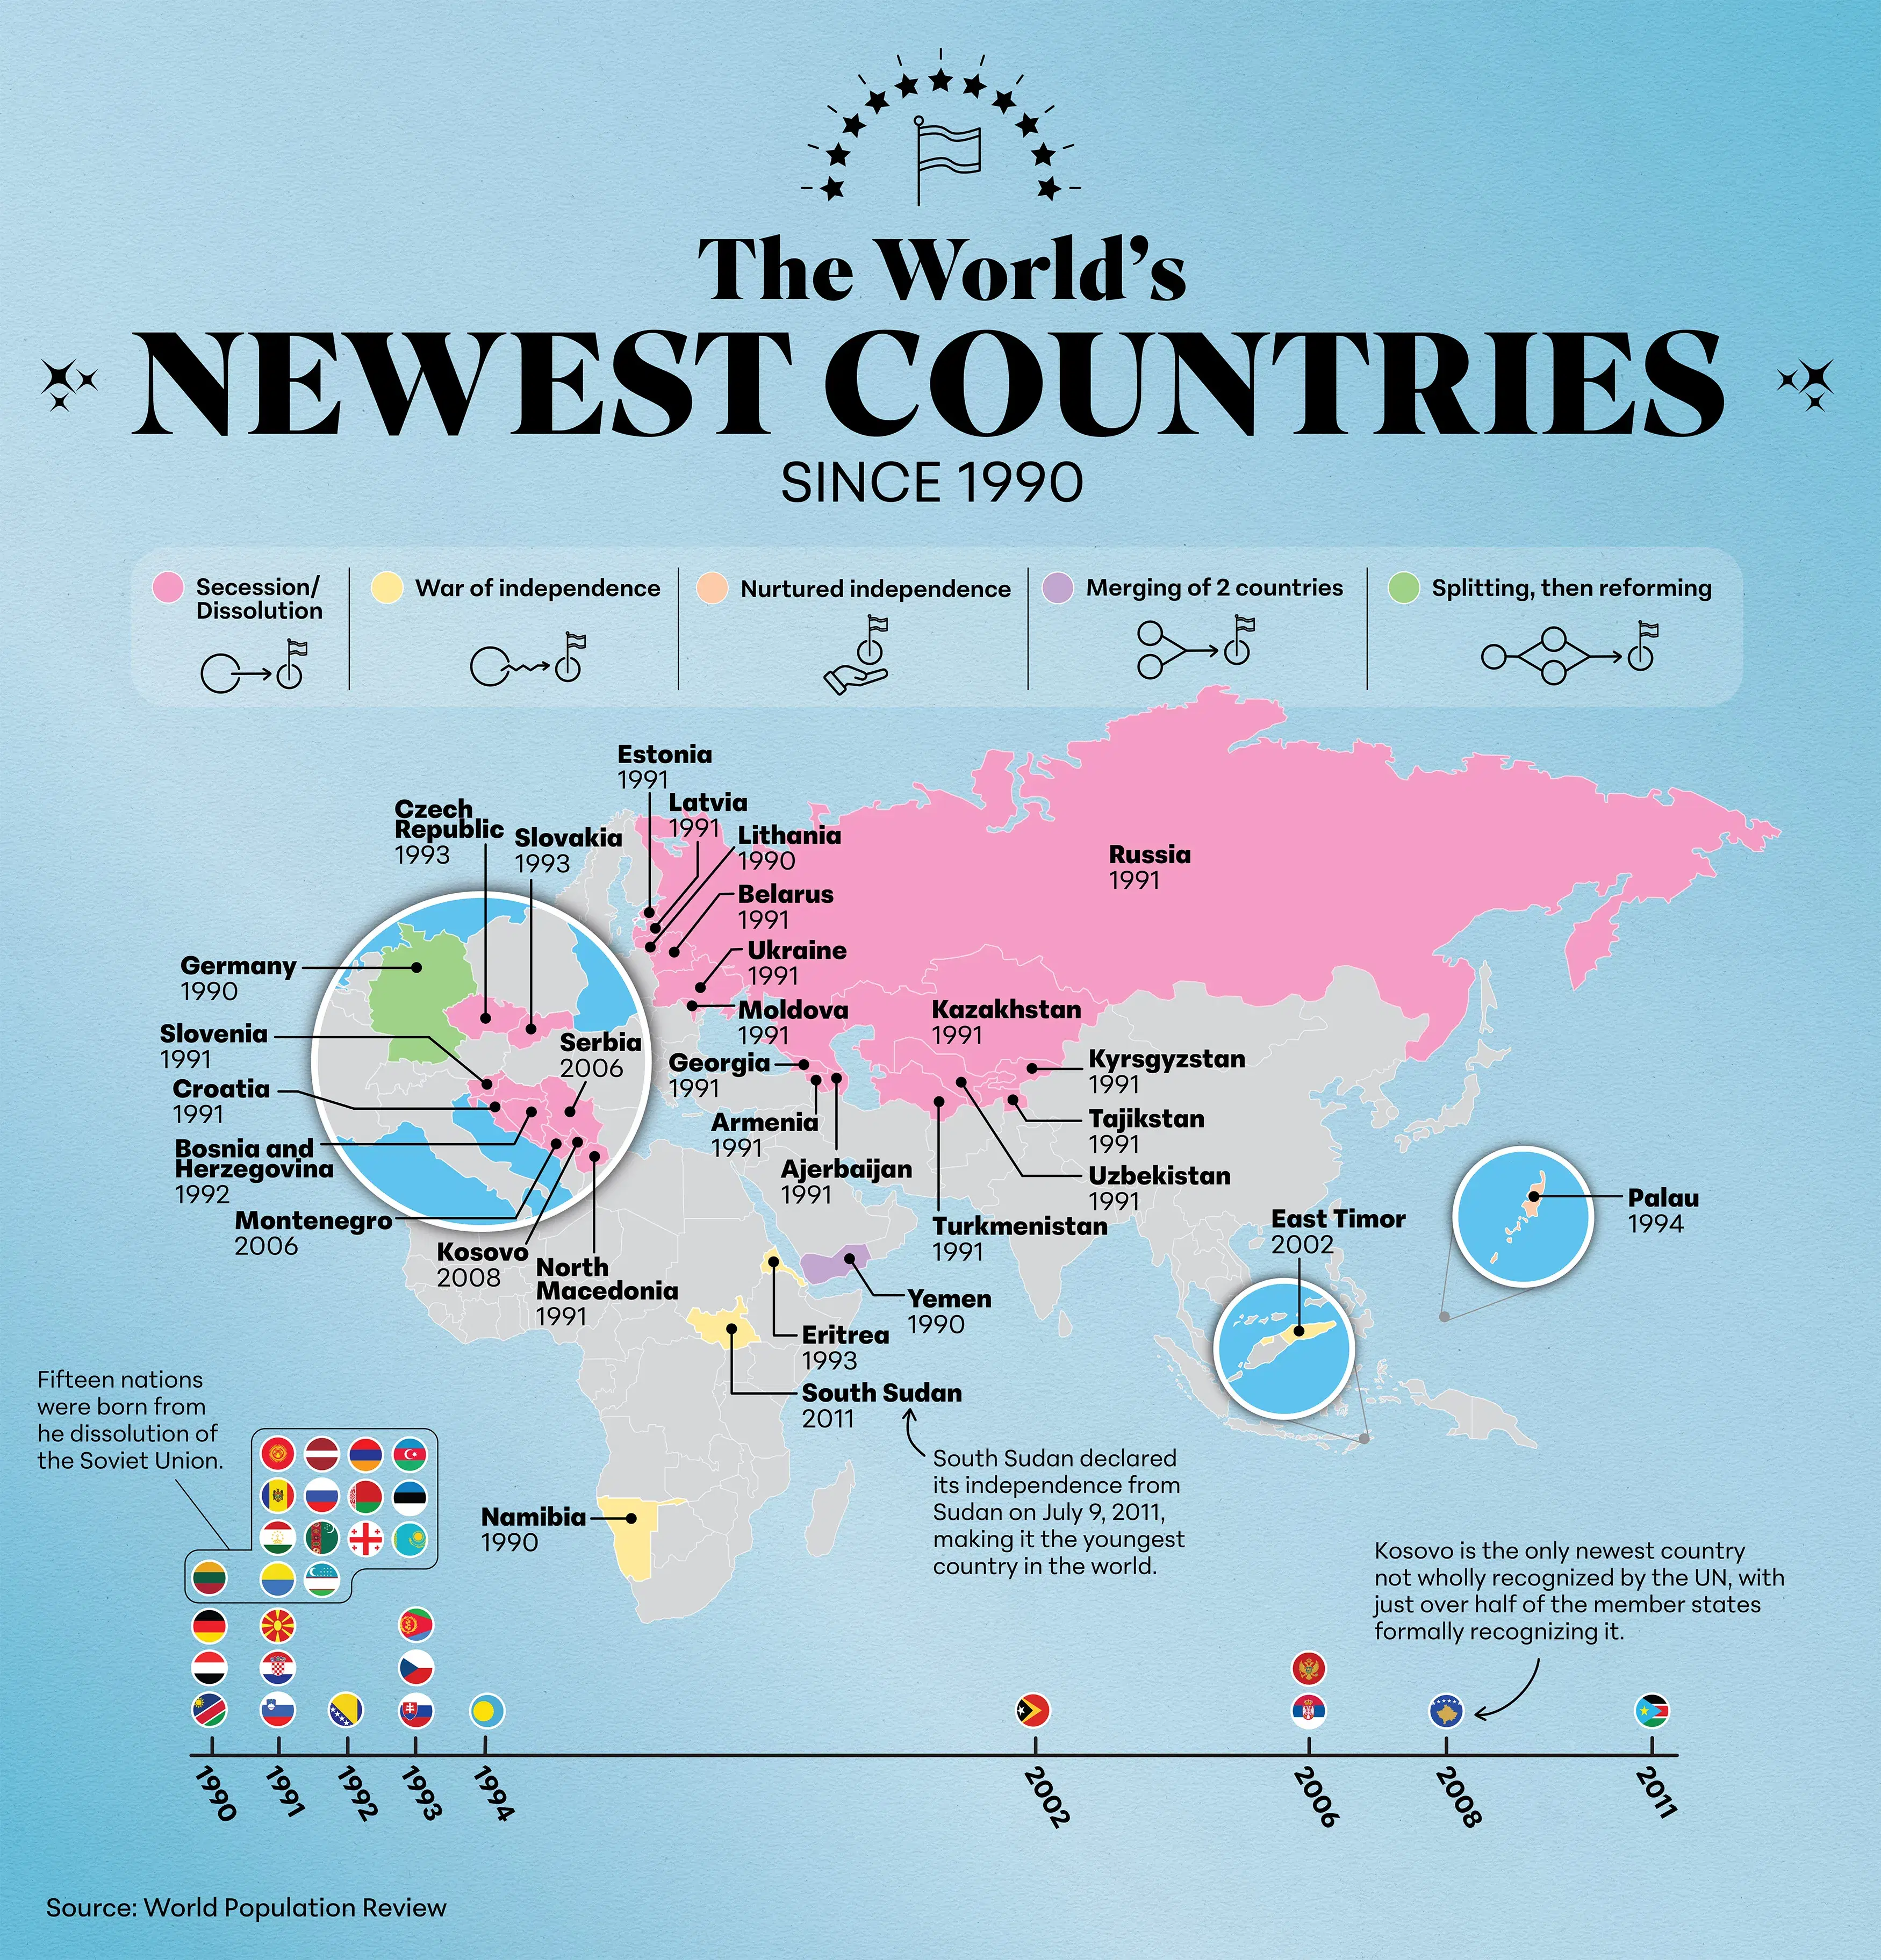 World's Newest Countries Since 1990